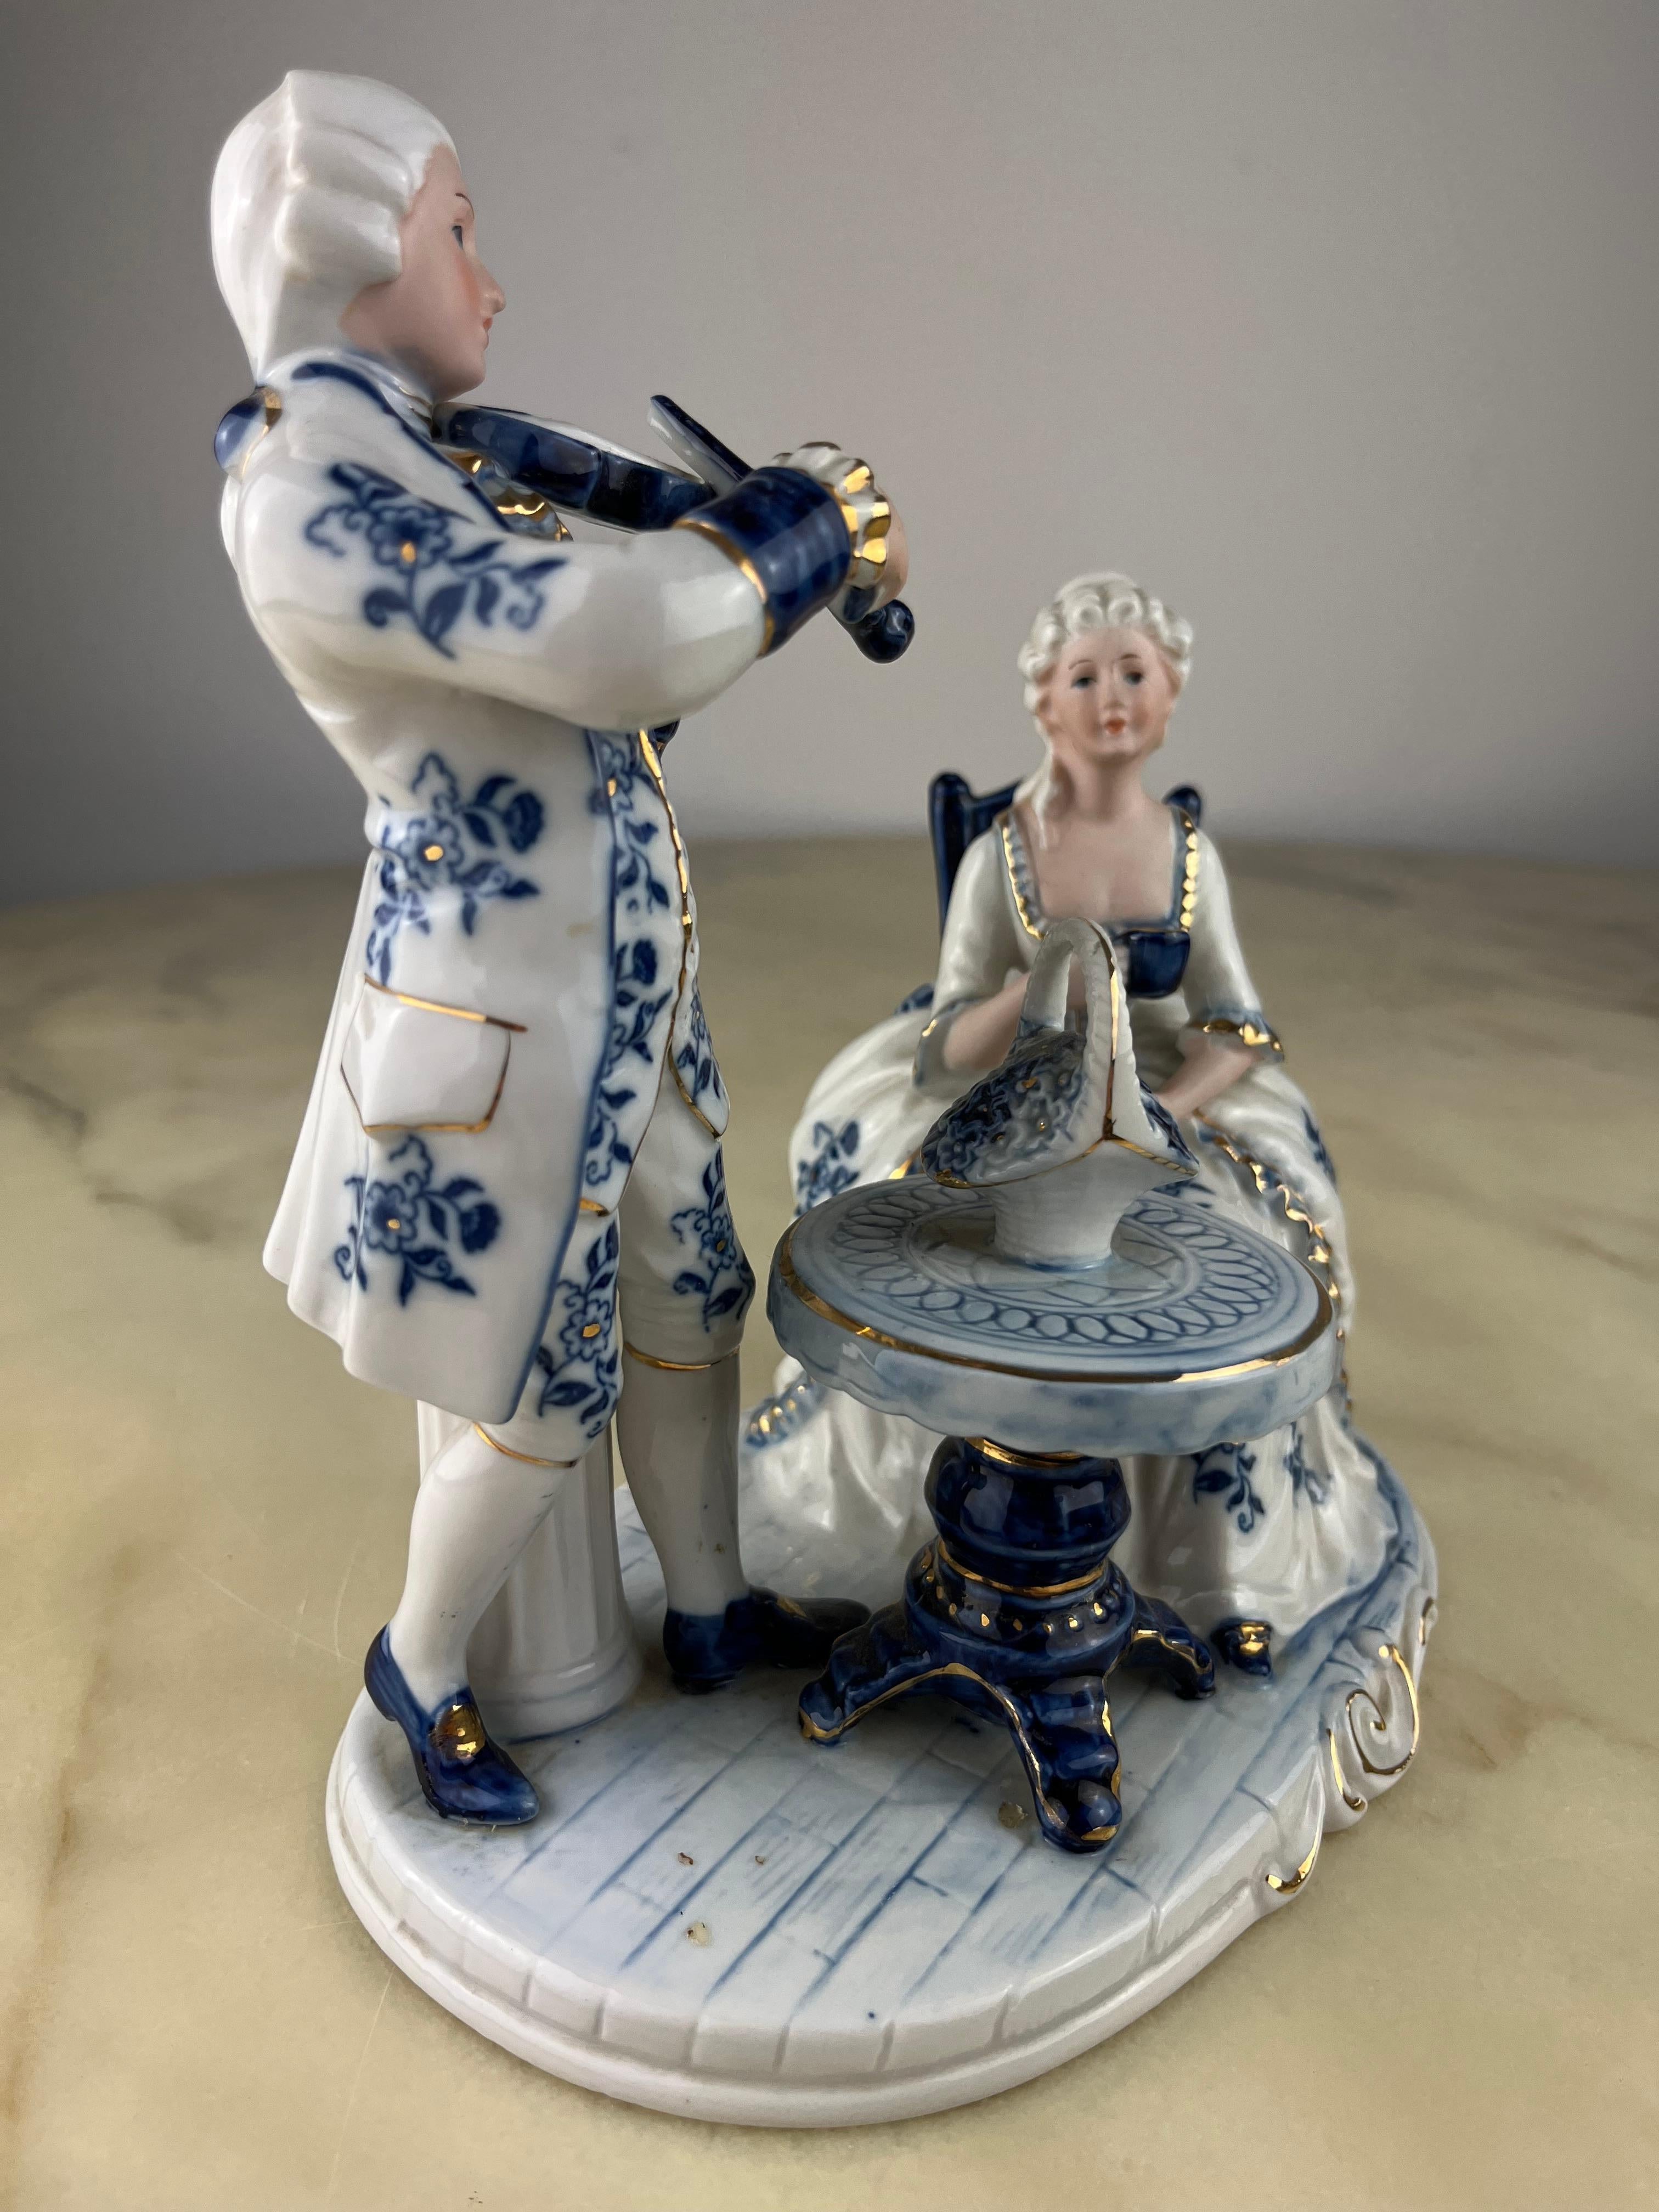 Porcelain figurine from Bassano del Grappa, Italy, 1970s.
It is in excellent condition, intact. Typical workmanship in shades of white and turquoise. It has always belonged to my family.